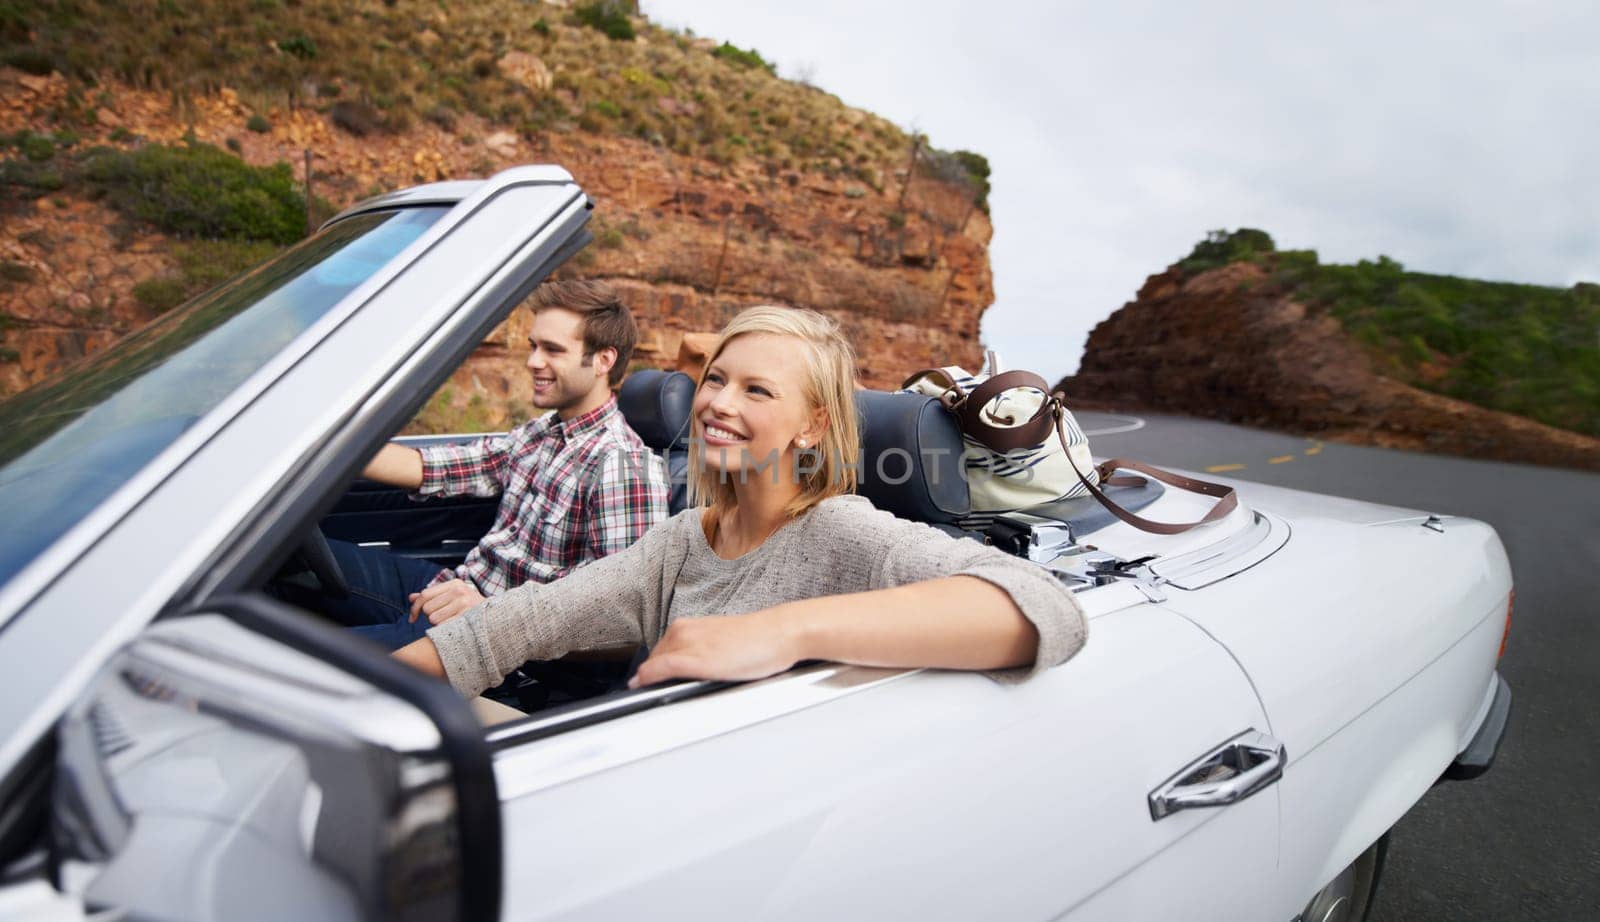 Happy couple, car and driving on road trip for travel, holiday weekend or outdoor vacation on street in nature. Young man and woman with smile for transportation or getaway in convertible vehicle.